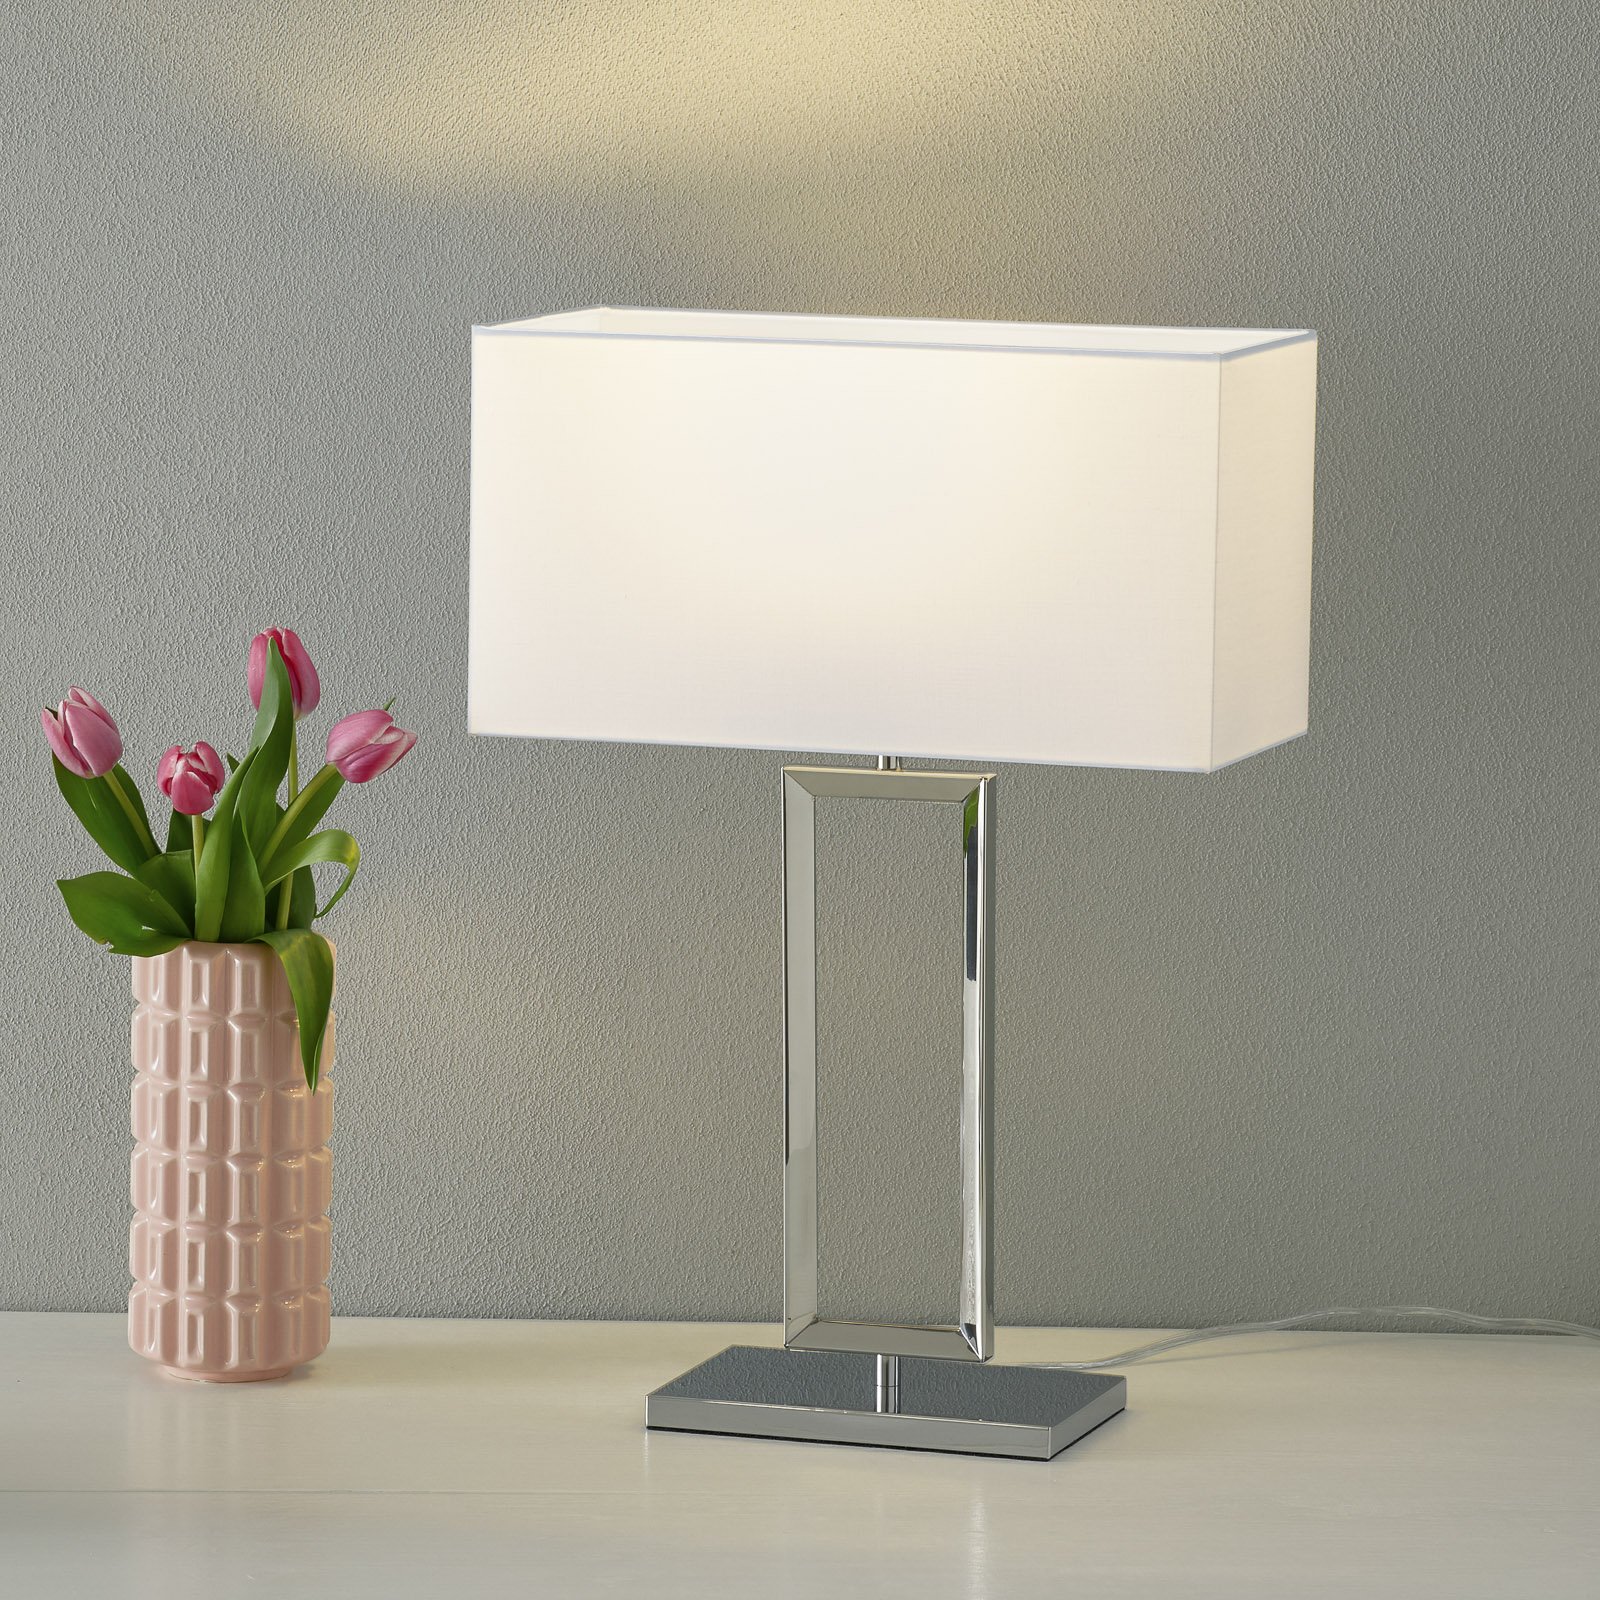 Table lamp ENNA 2 with a height of 53 cm